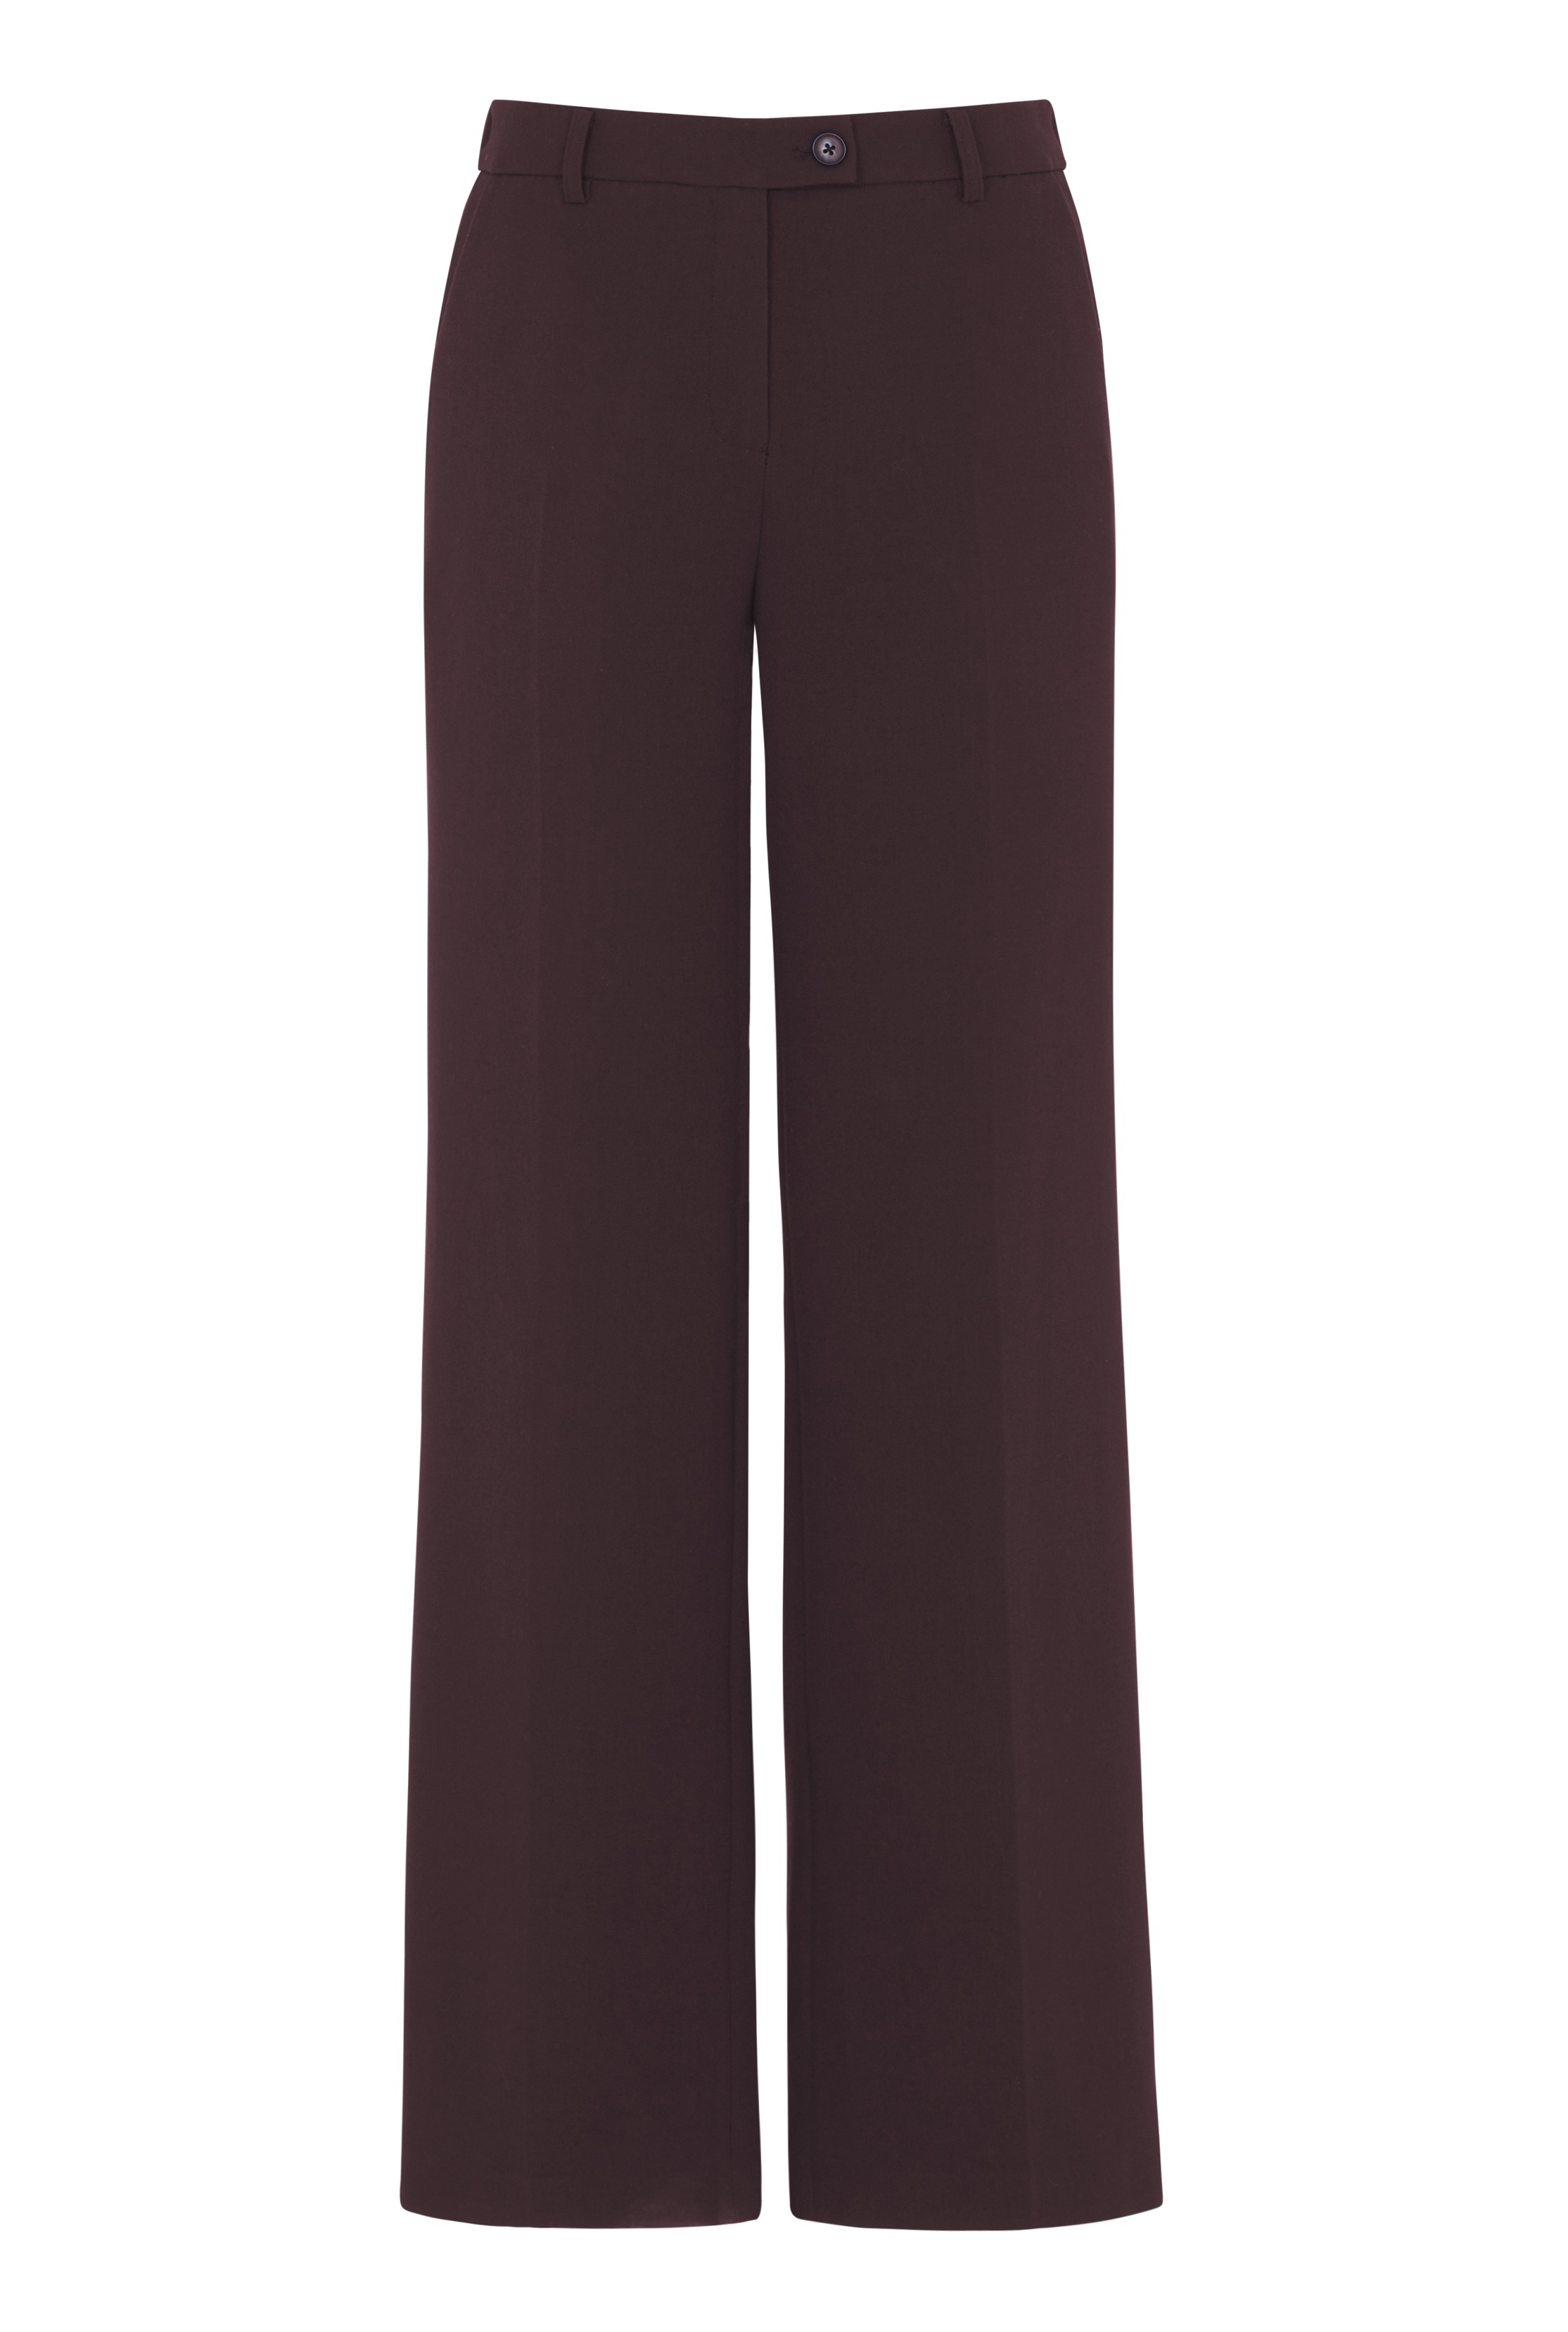 Burgundy Double Faced Wide Leg Trousers | Long Tall Sally